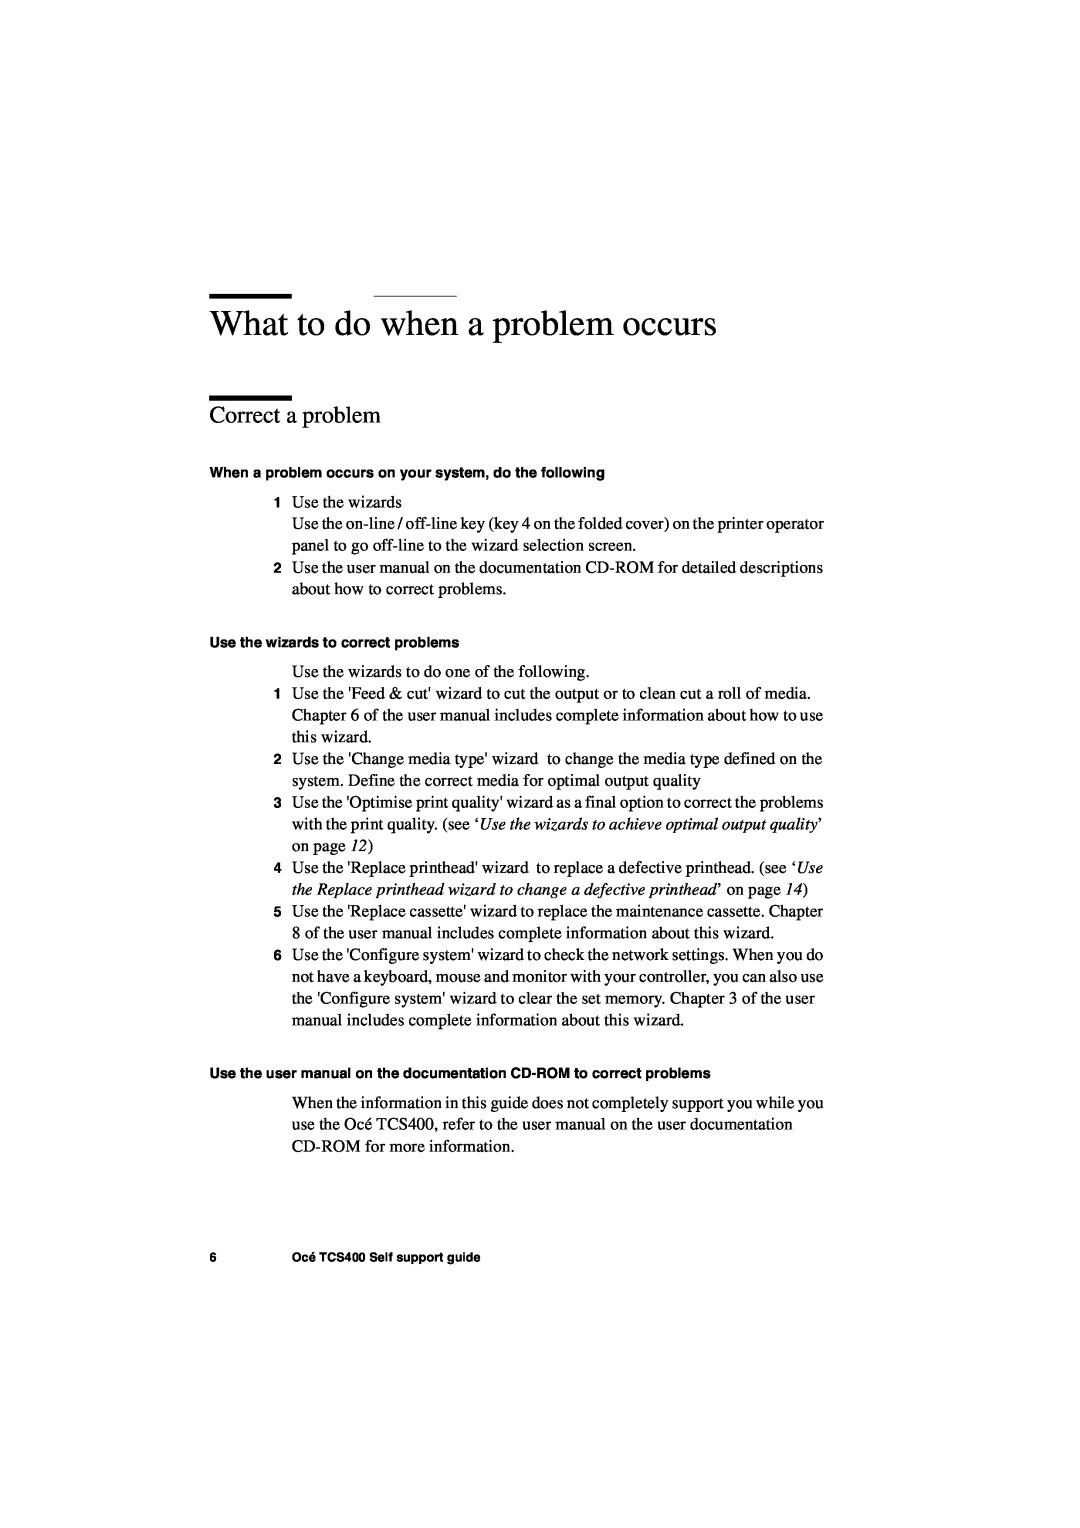 Oce North America TCS400 manual What to do when a problem occurs, Correct a problem 